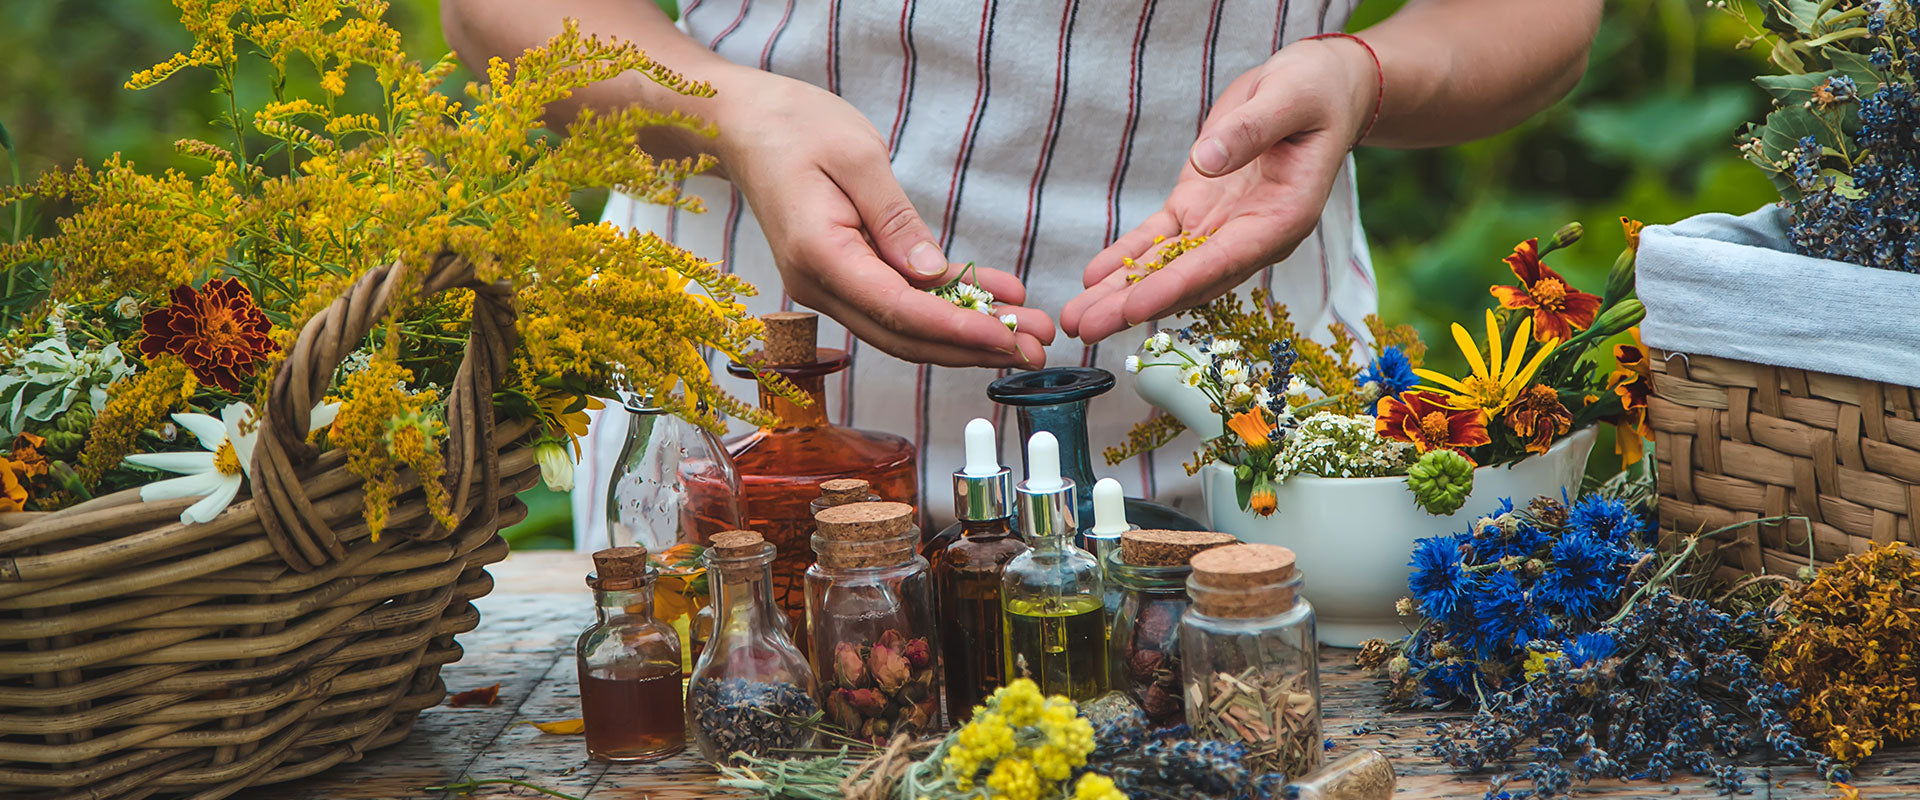 herbalists hands making herbal tinctures from dry flowers, botanicals, herbs